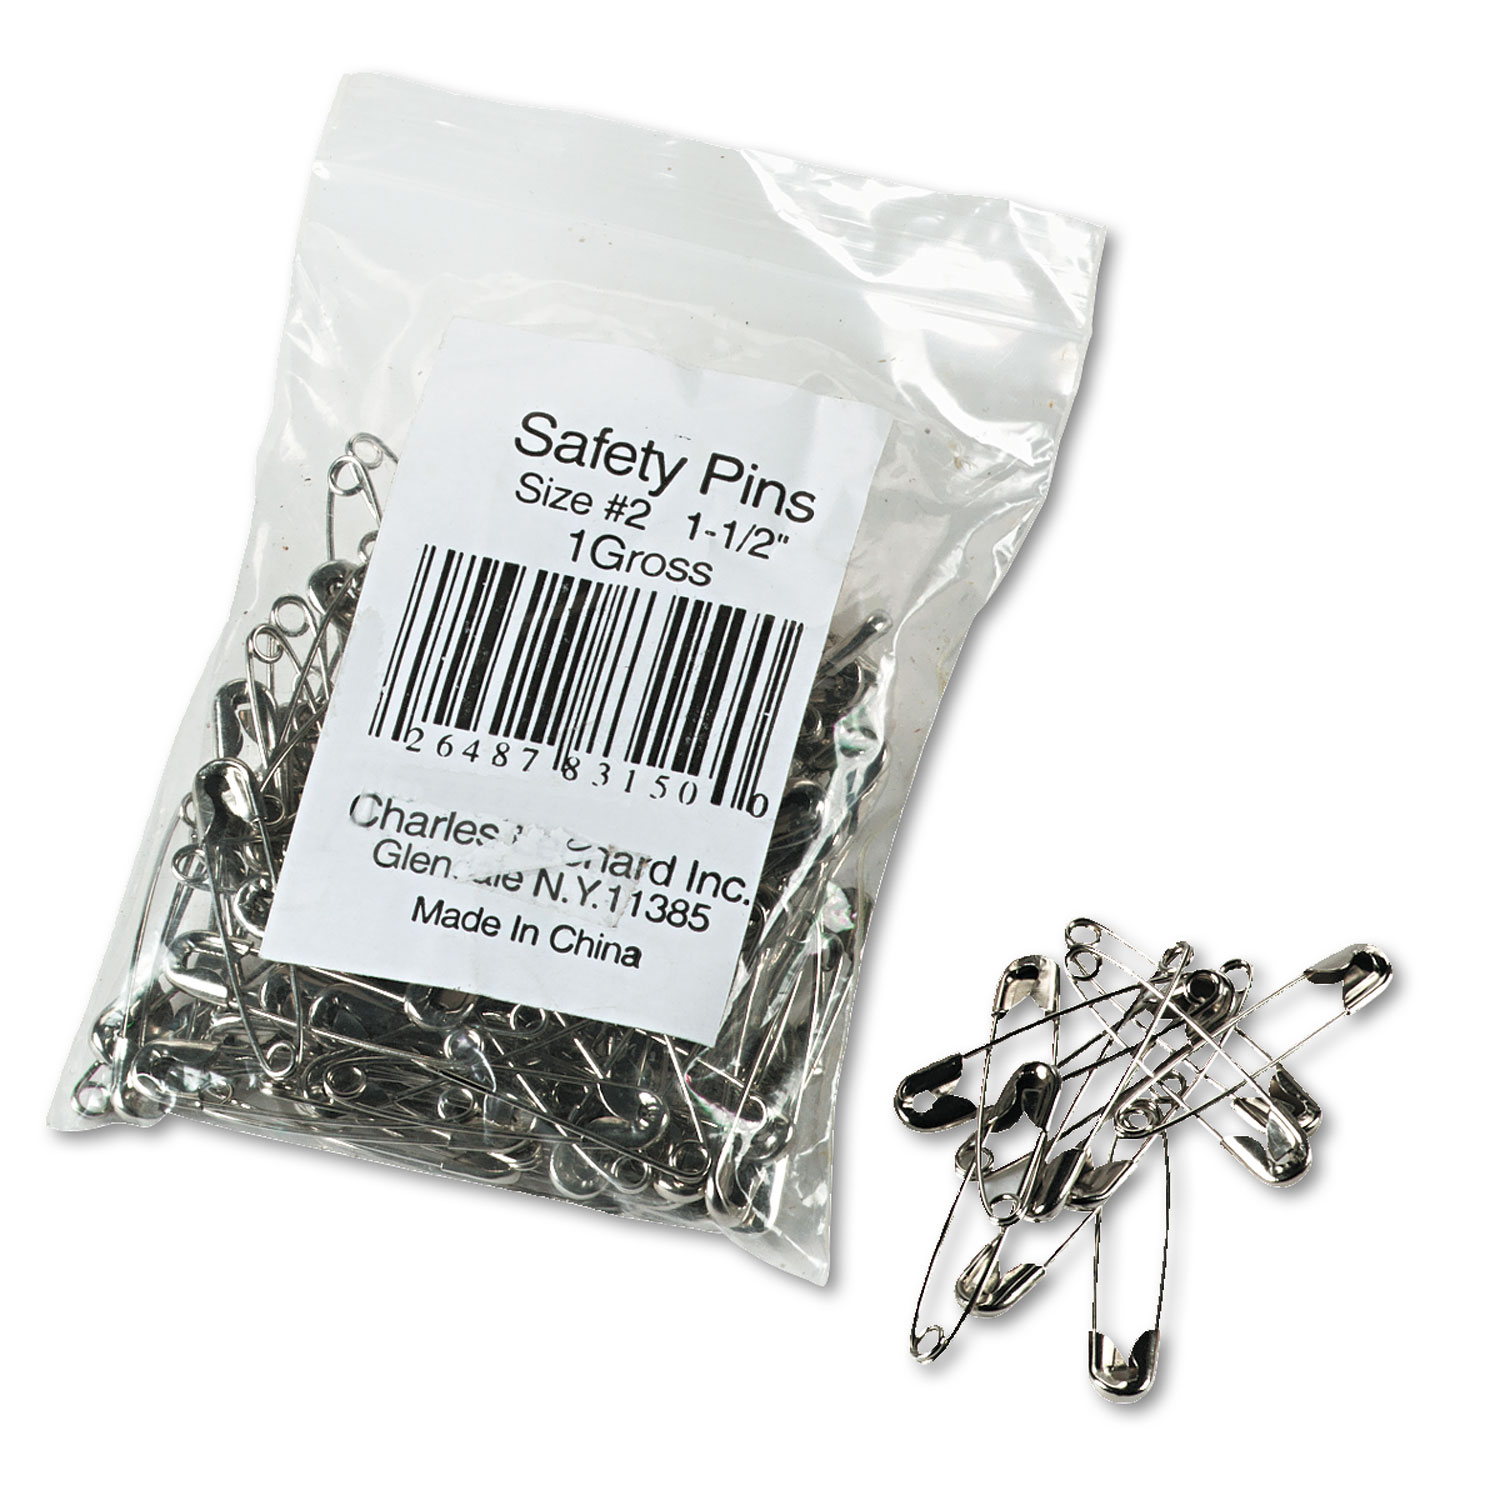  Charles Leonard 83150 Safety Pins, Nickel-Plated, Steel, 1 1/2 Length, 144/Pack (LEO83150) 